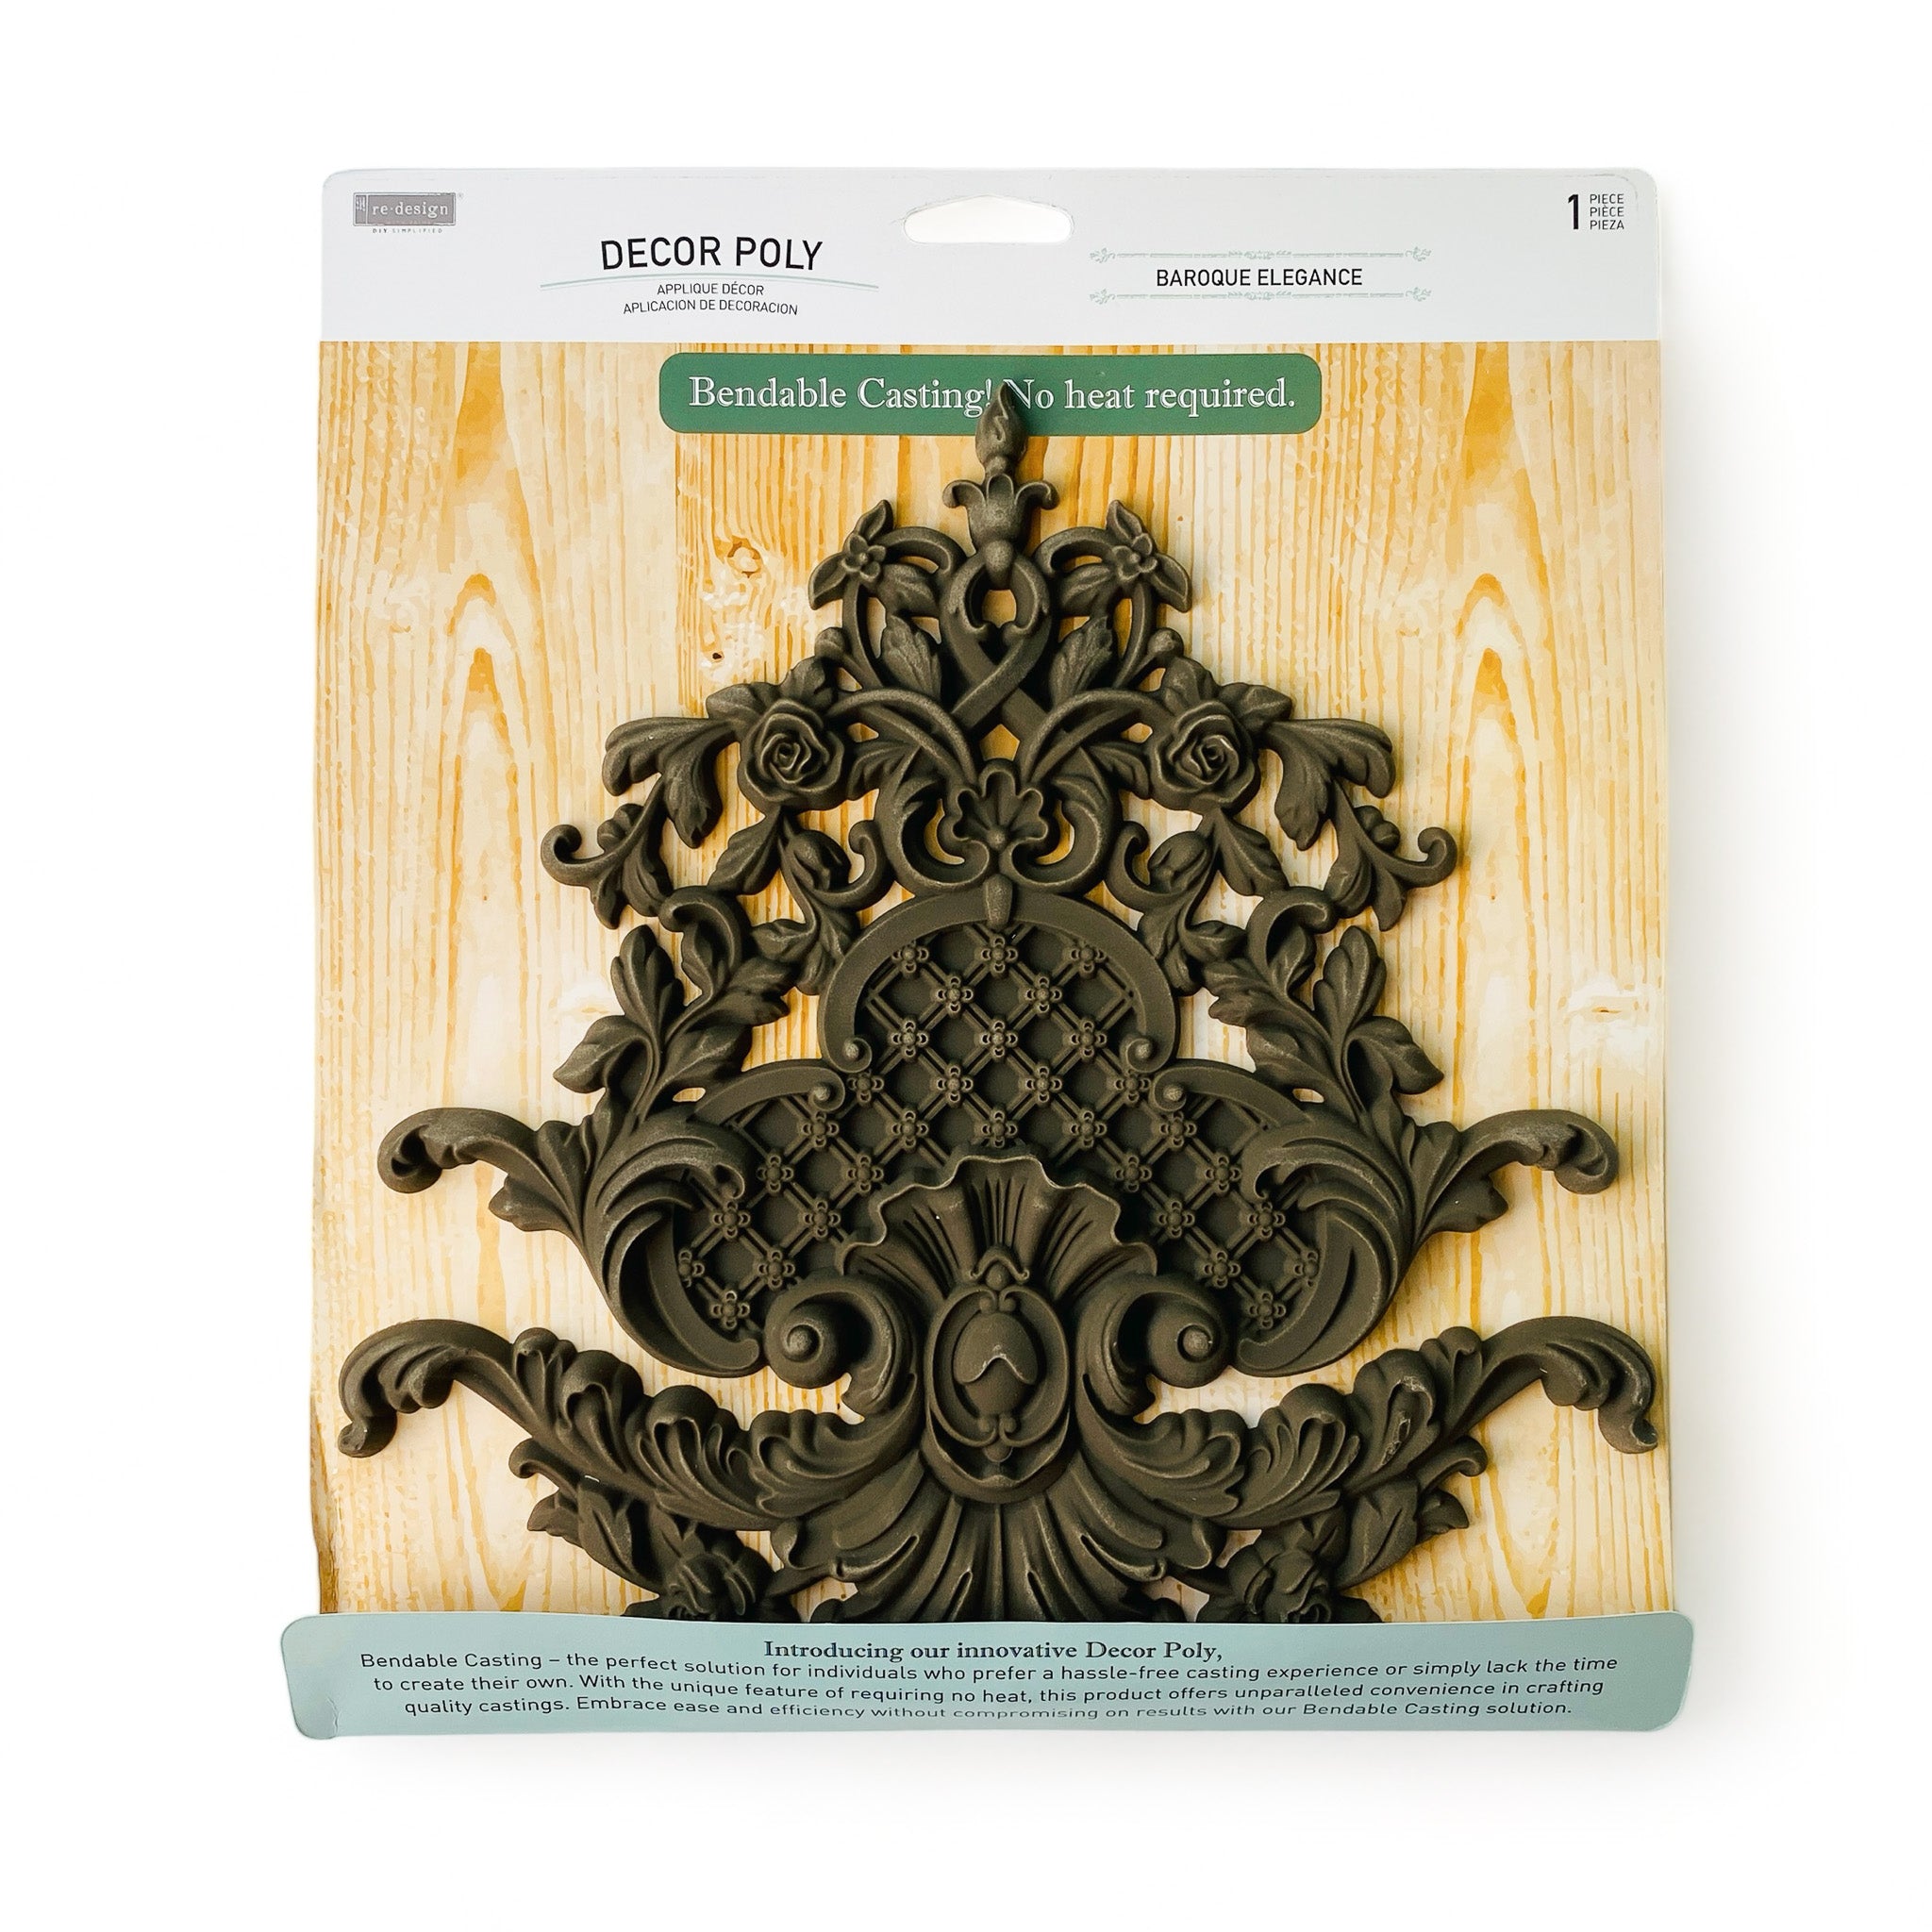 A package of ReDesign with Prima's Baroque Elegance Decor Poly is against a white background.